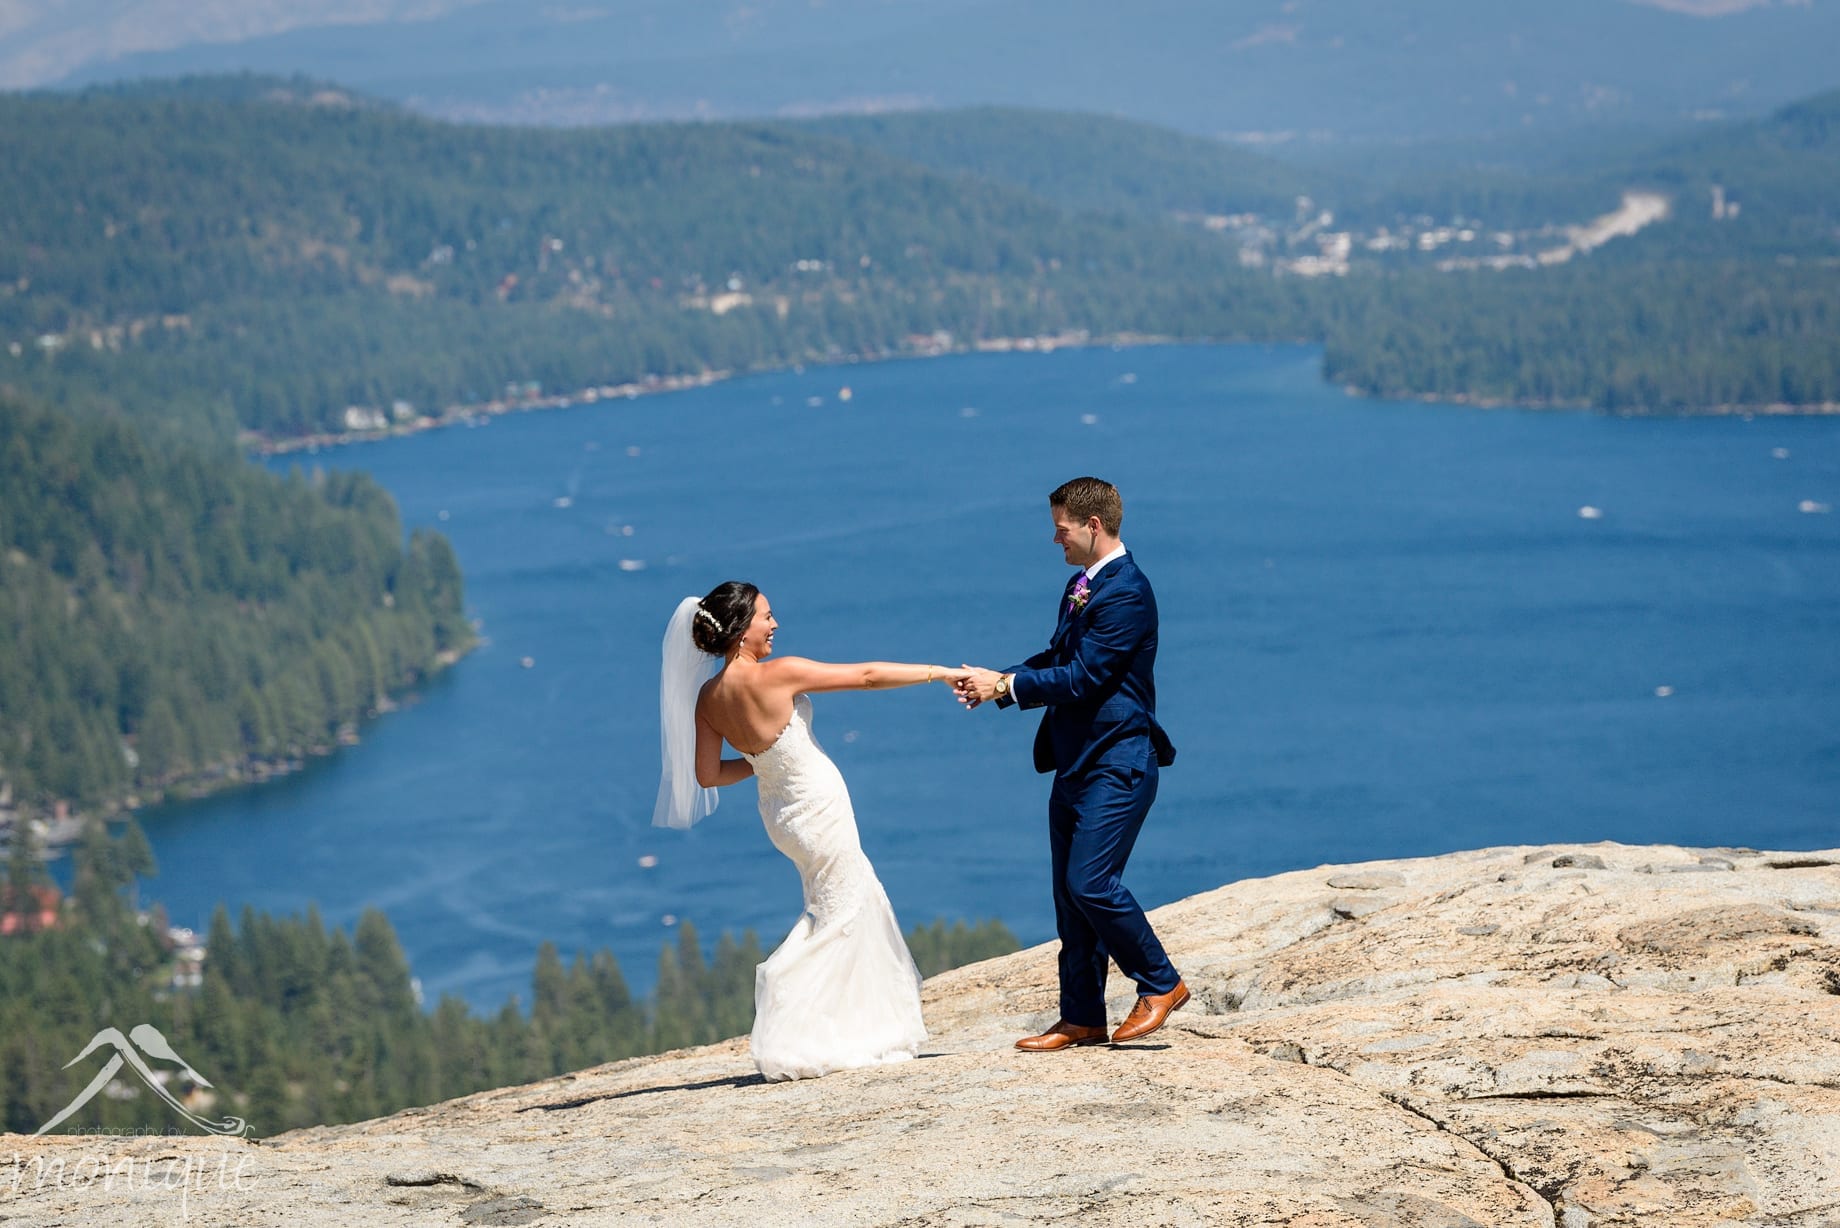 wedding photography in Yruckee at the Donner Lake over look with the bride and groom on a granite rock, Photography by Monique